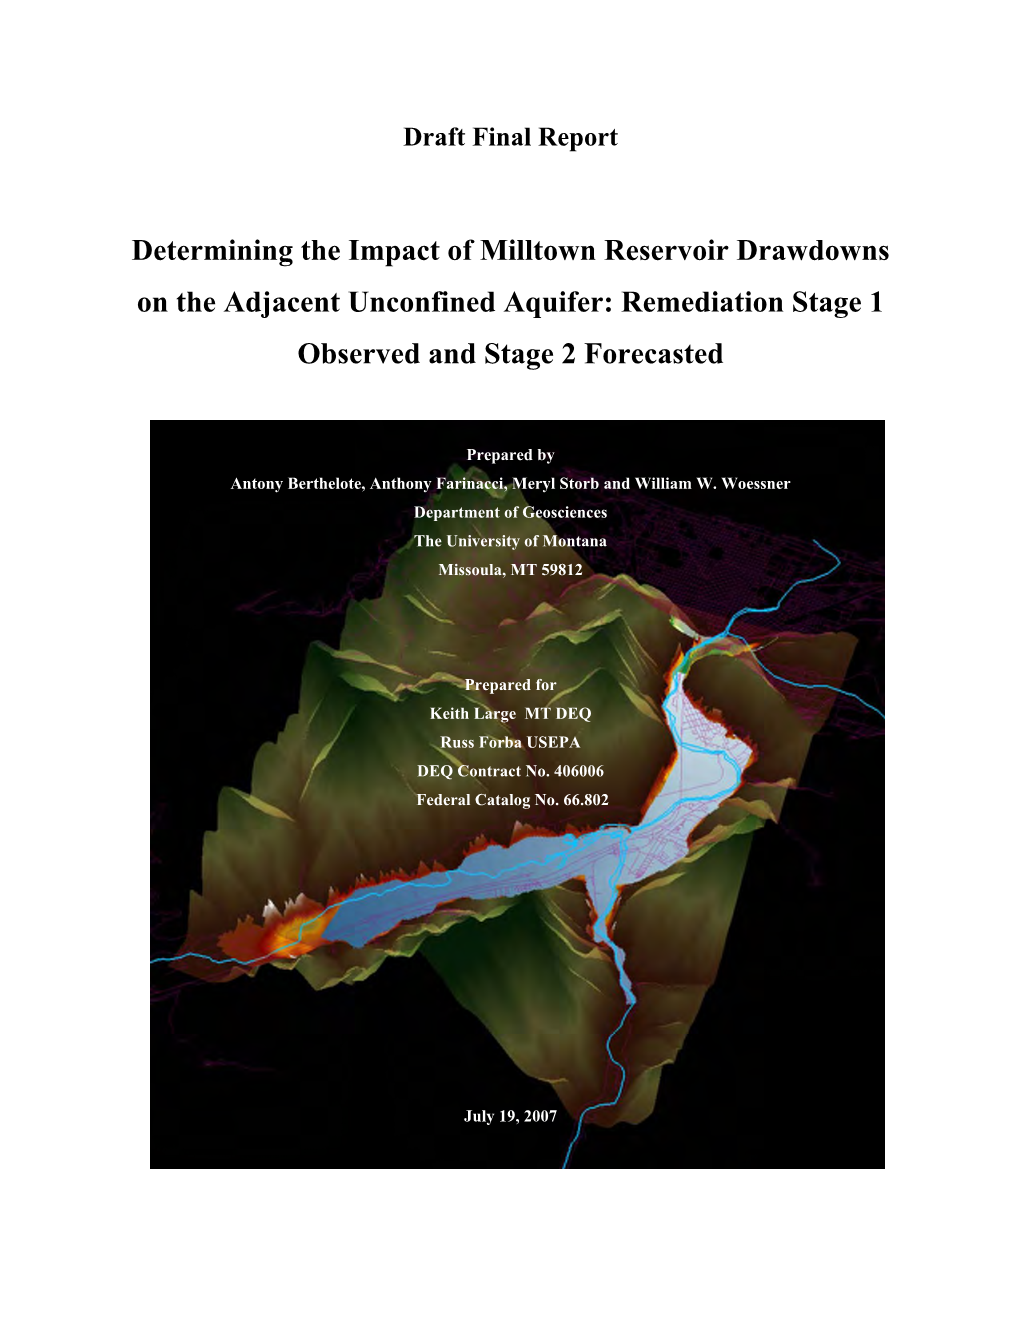 Determining the Impact of Milltown Reservoir Drawdowns on the Adjacent Unconfined Aquifer: Remediation Stage 1 Observed and Stage 2 Forecasted